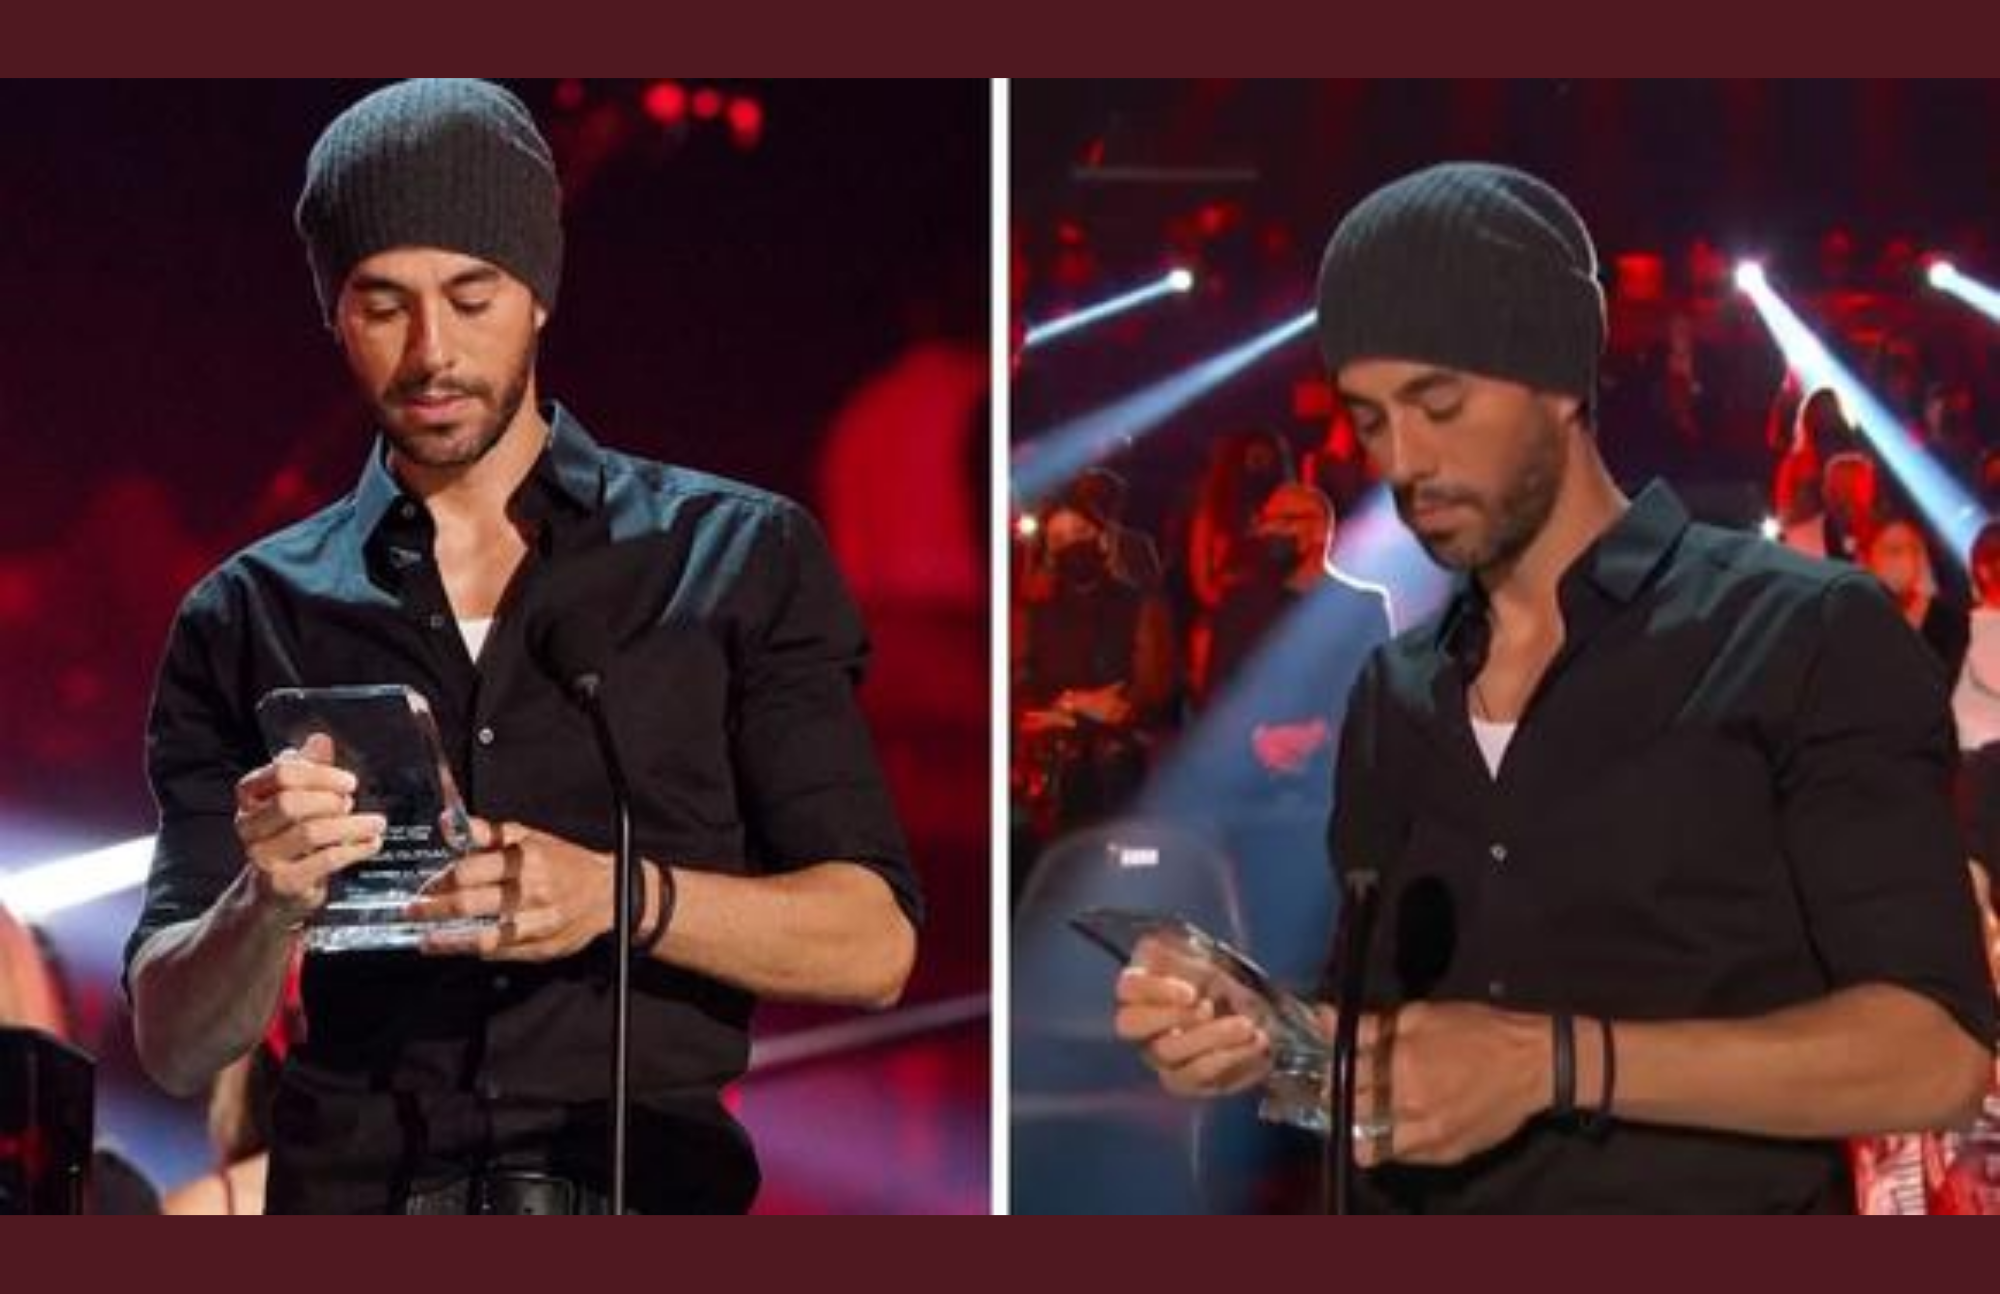 Enrique Iglesias was awarded at the Billboard charts